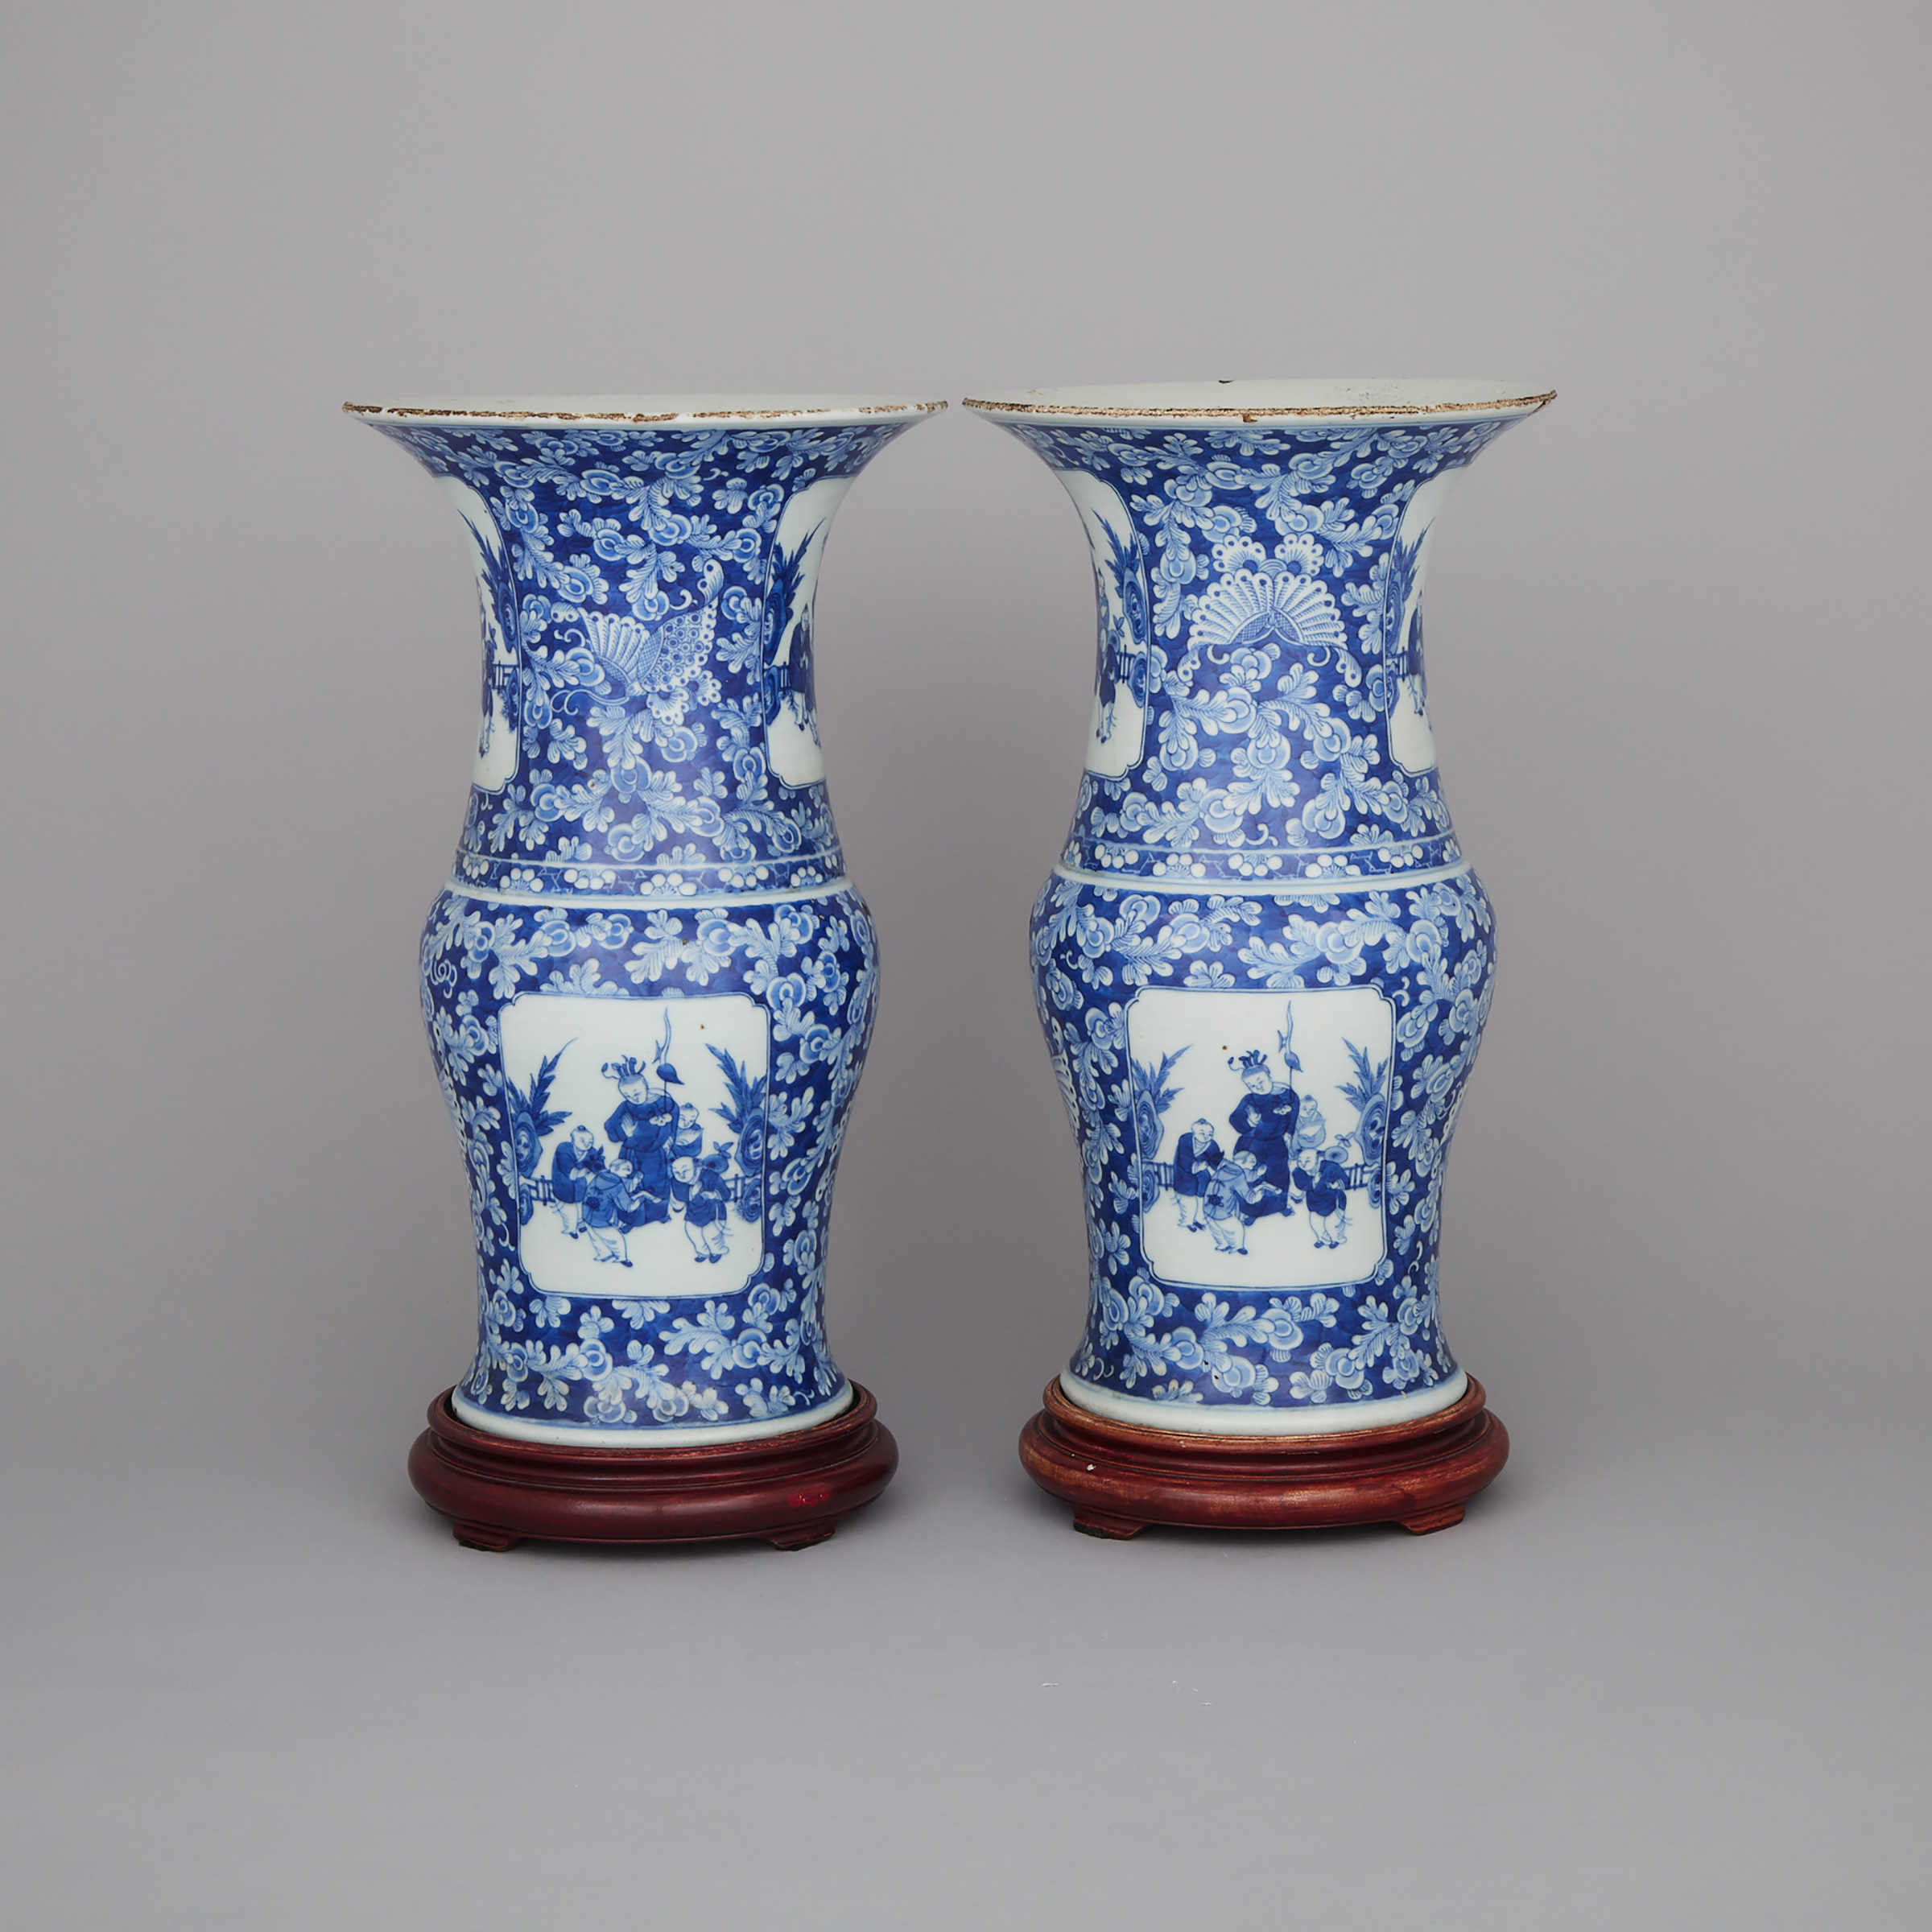 A Pair of Blue and White Beaker Vases, 19th Century